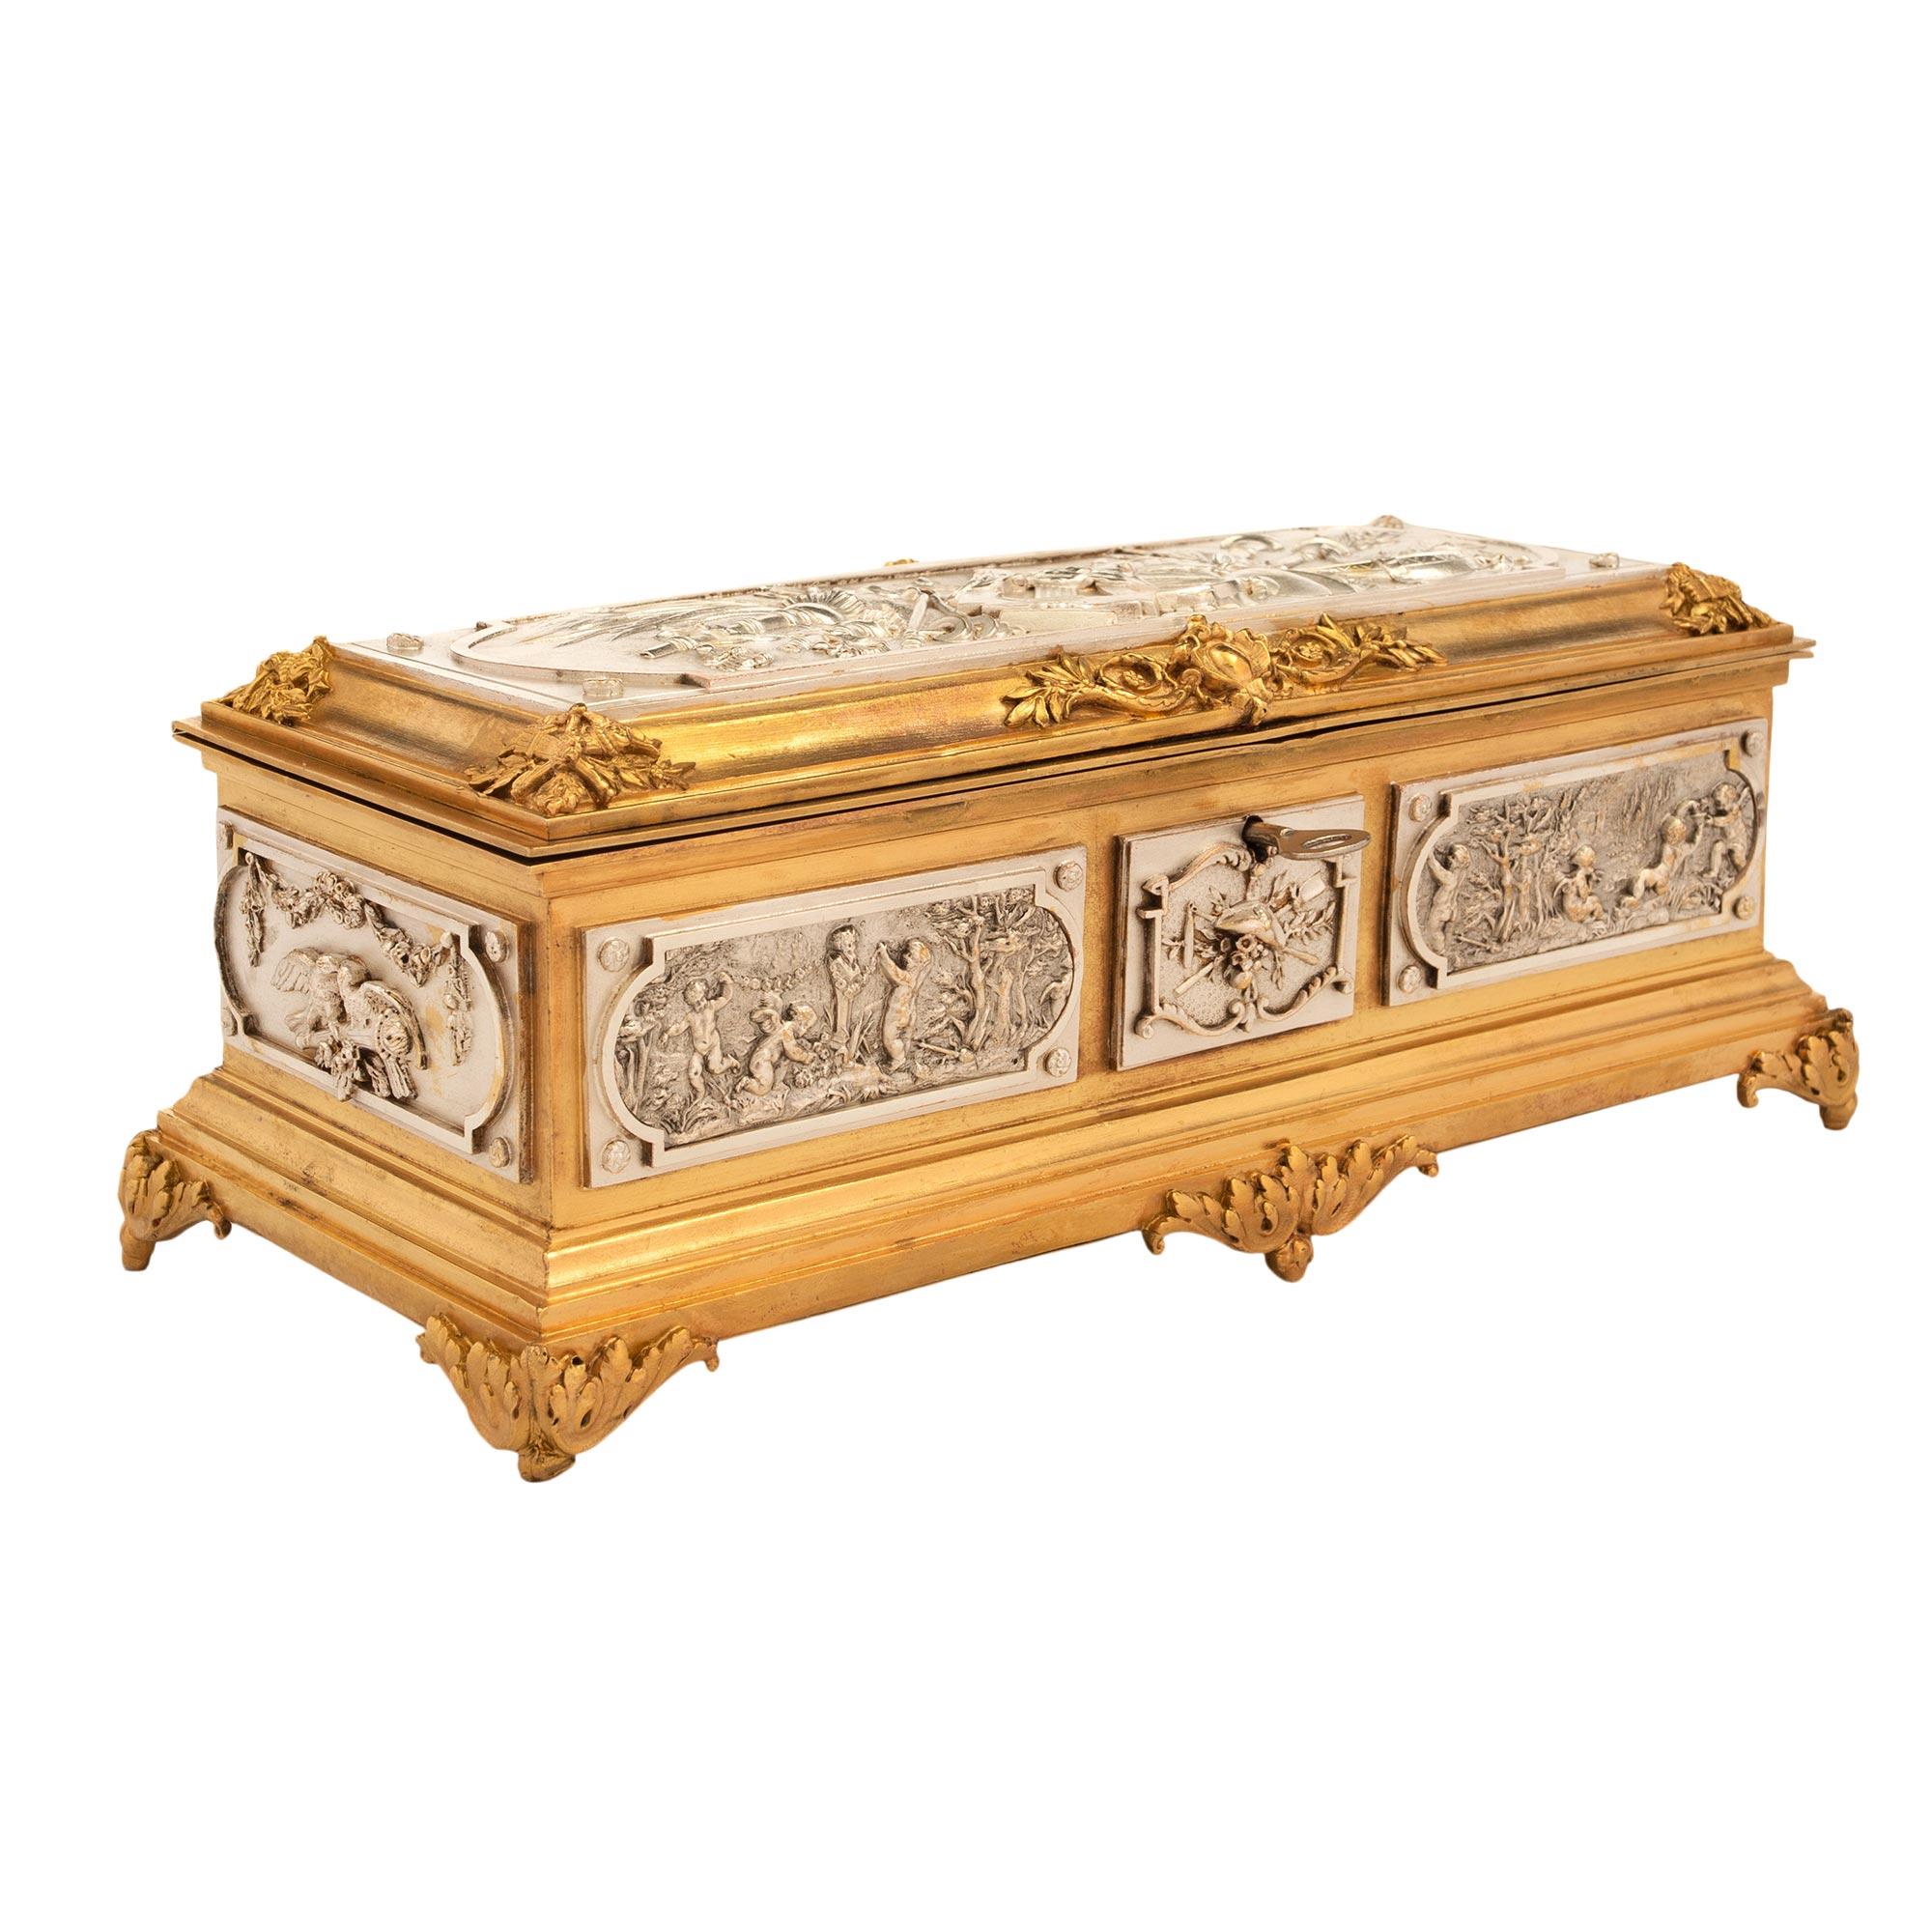 A wonderful and high quality French mid-19th century Louis XVI style jewelry box in ormolu and silvered bronze. The rectangular shaped box is raised by scrolled acanthus leaf designed supports. The front has three raised and richly chased panels,